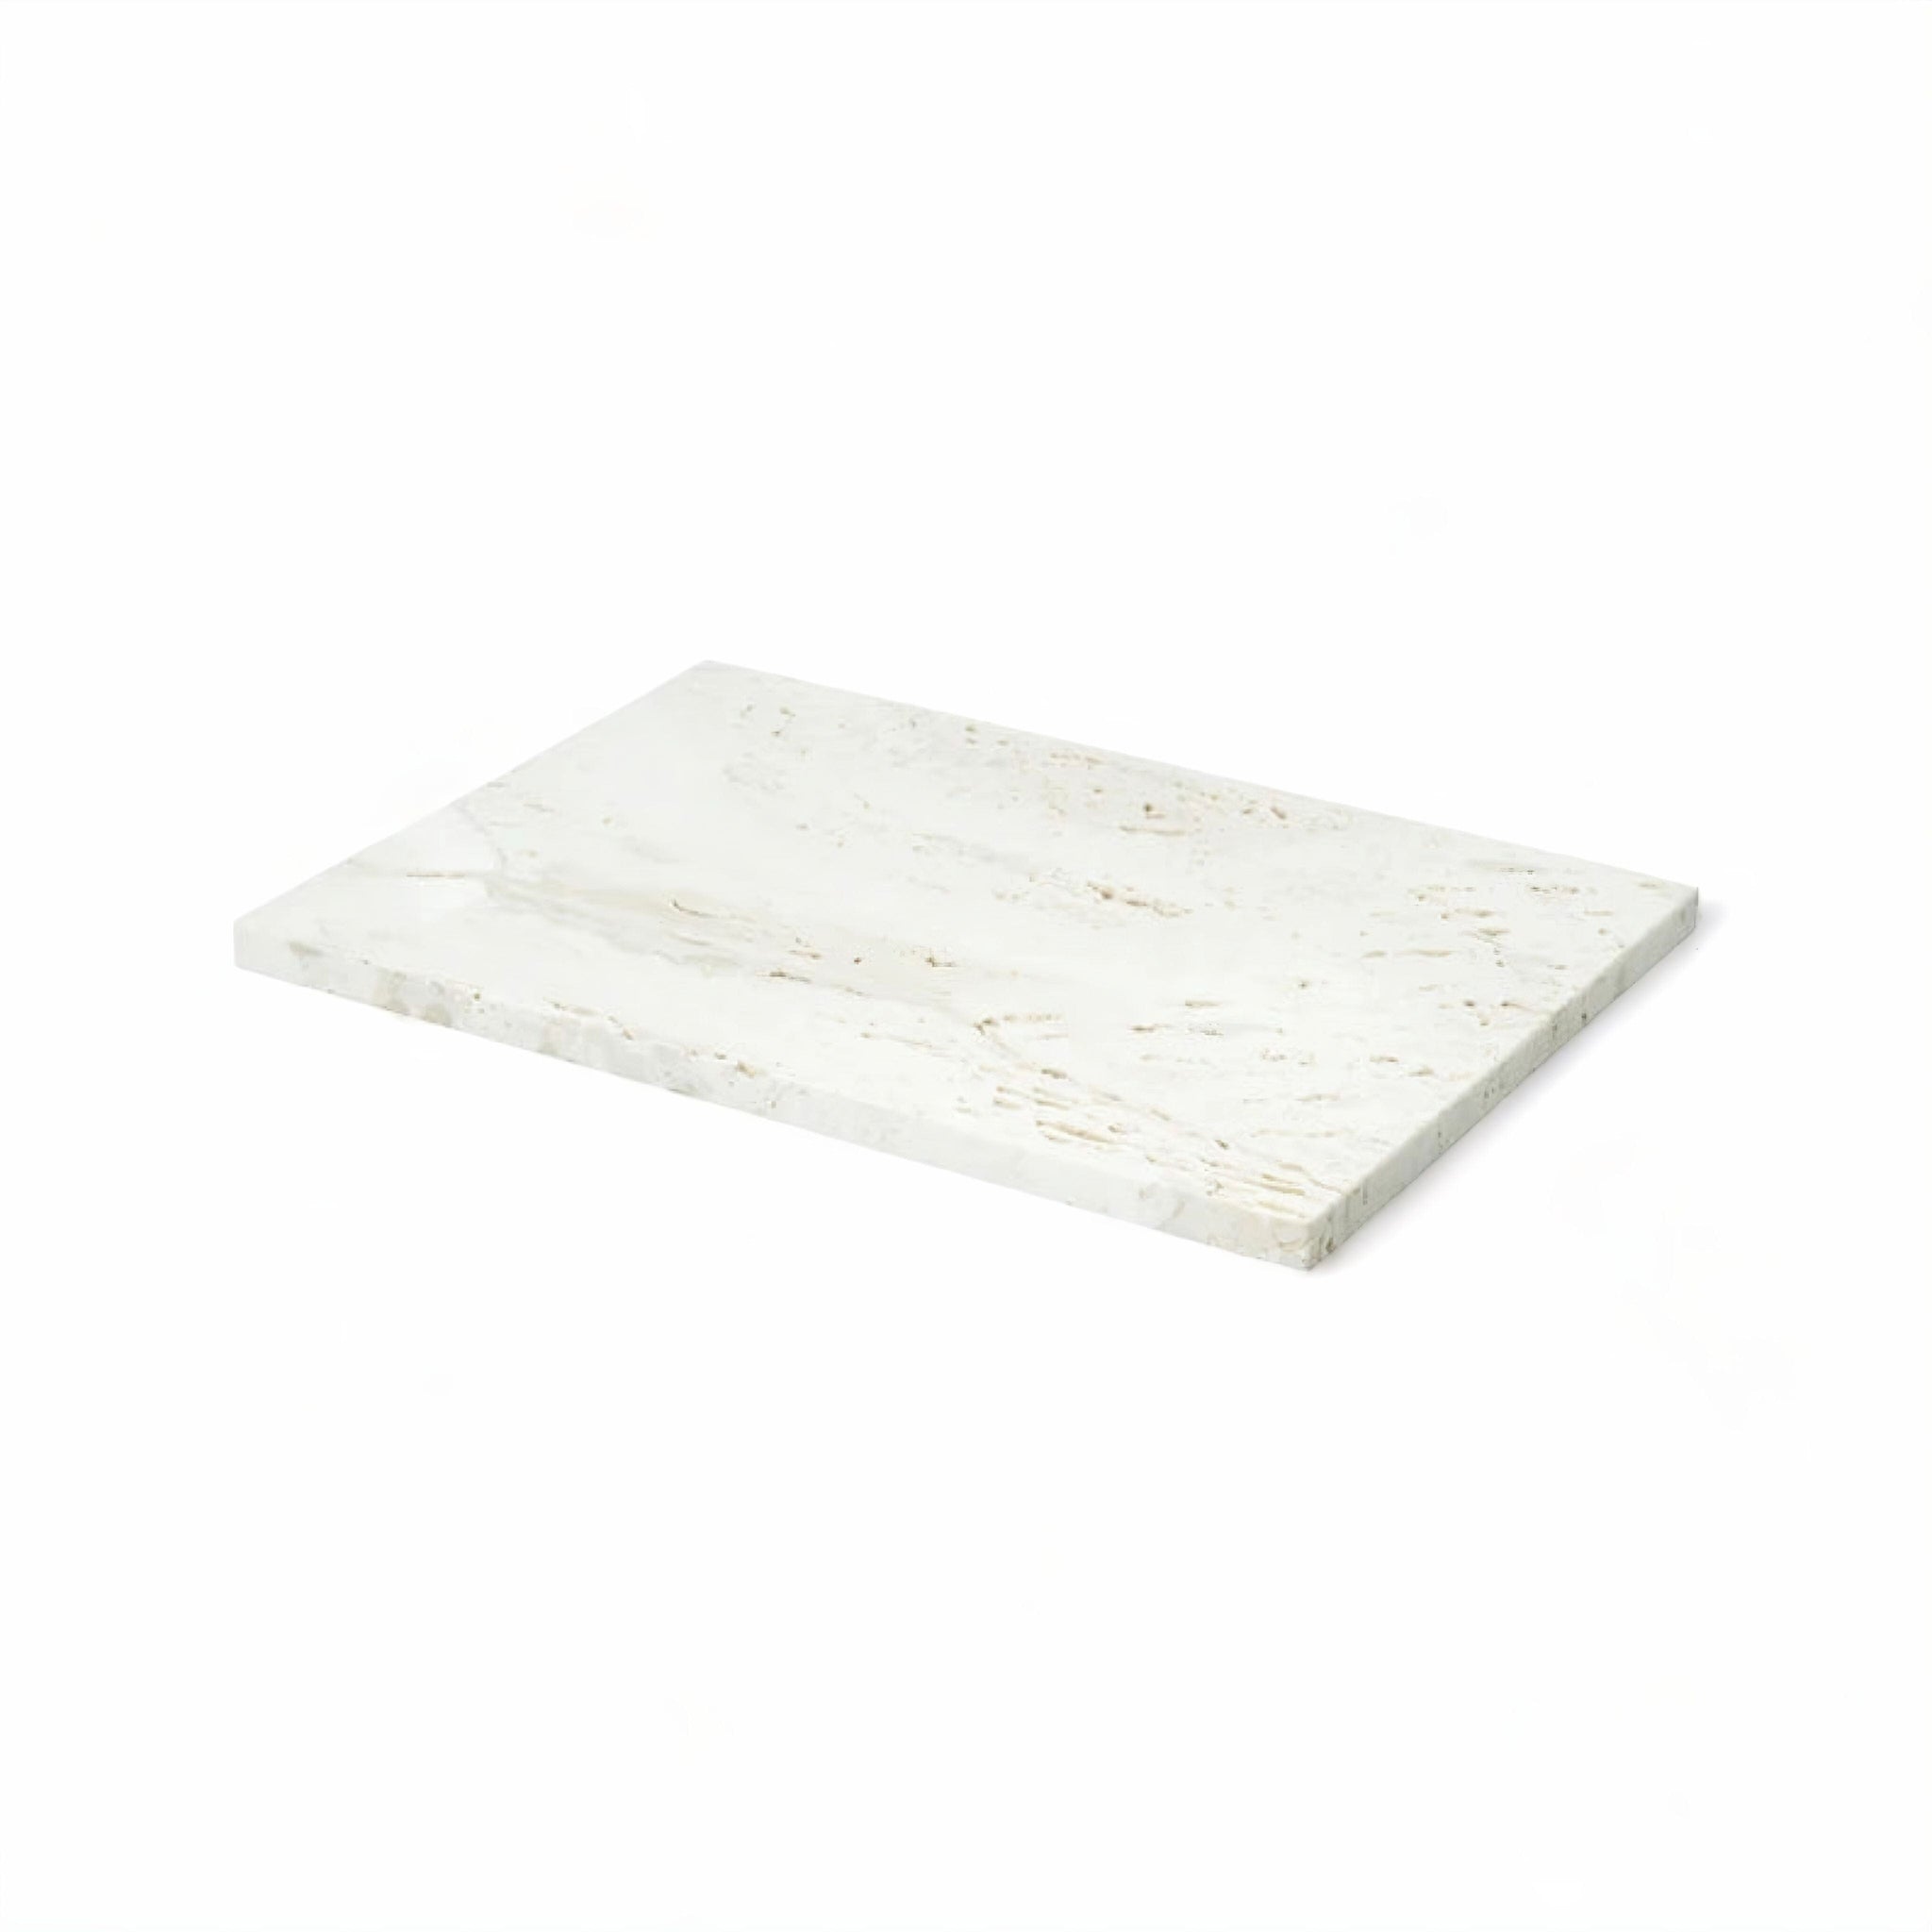 Travertine Tranquility Collection Tray C 